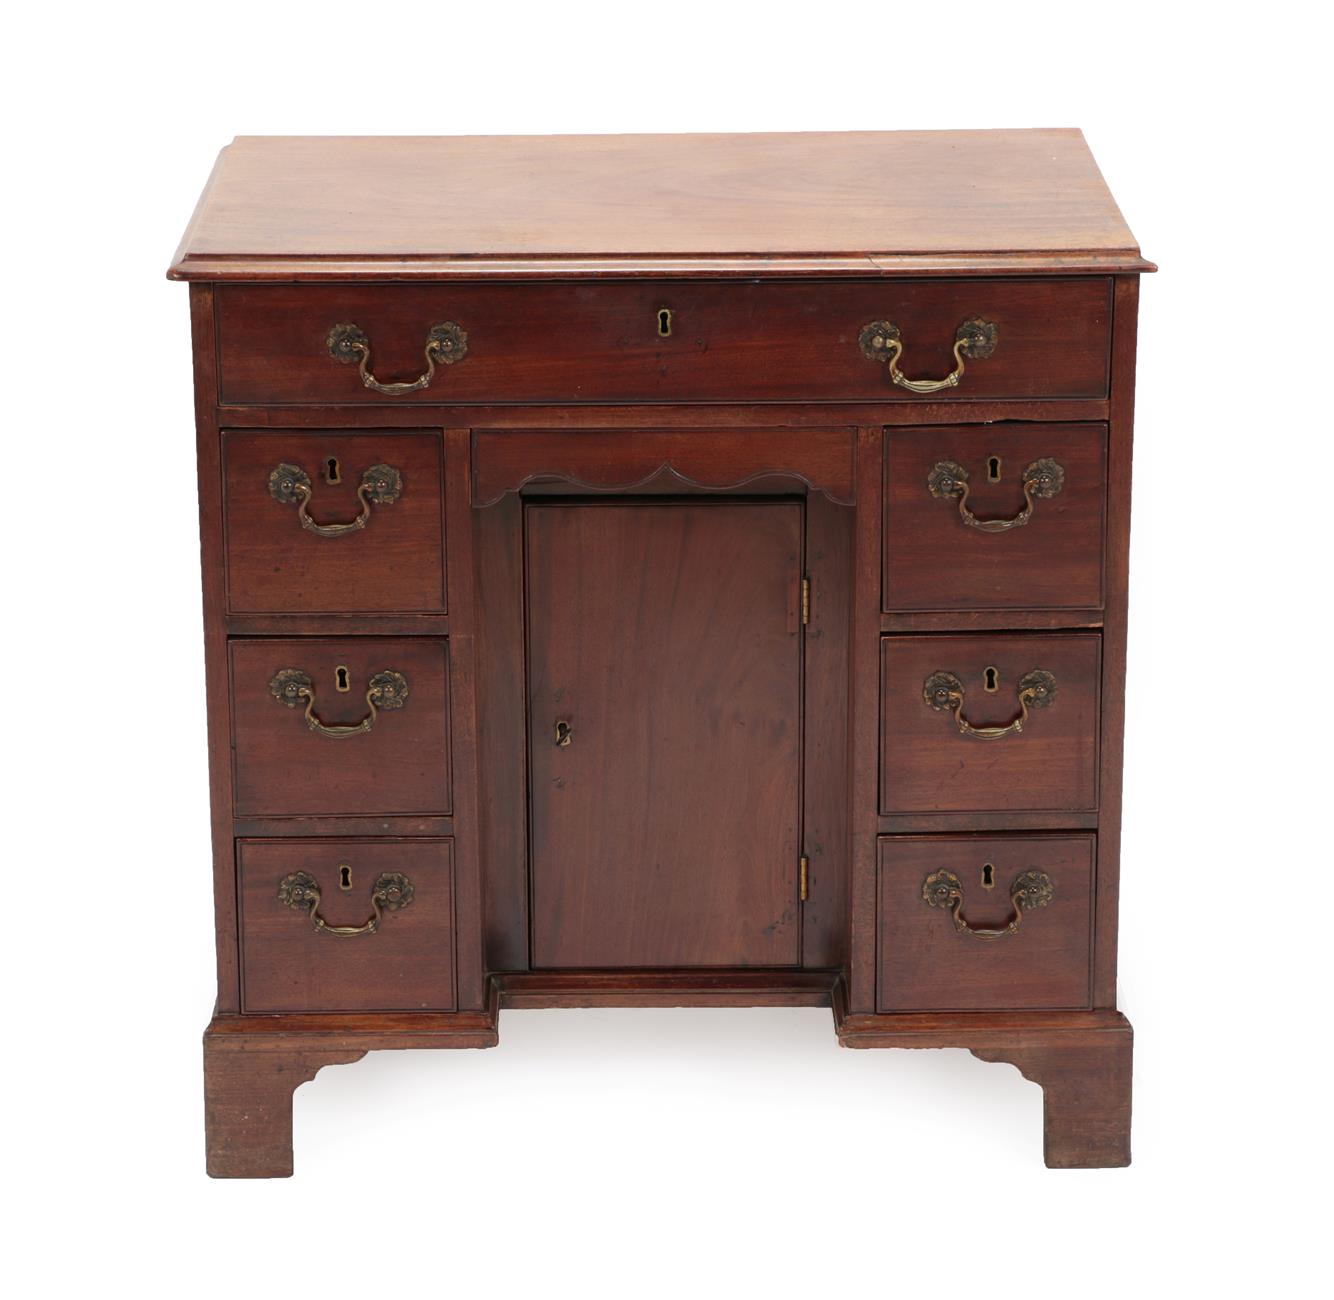 Lot 481 - A George III Mahogany Kneehole Dressing Table, late 18th century, the moulded top above a long...